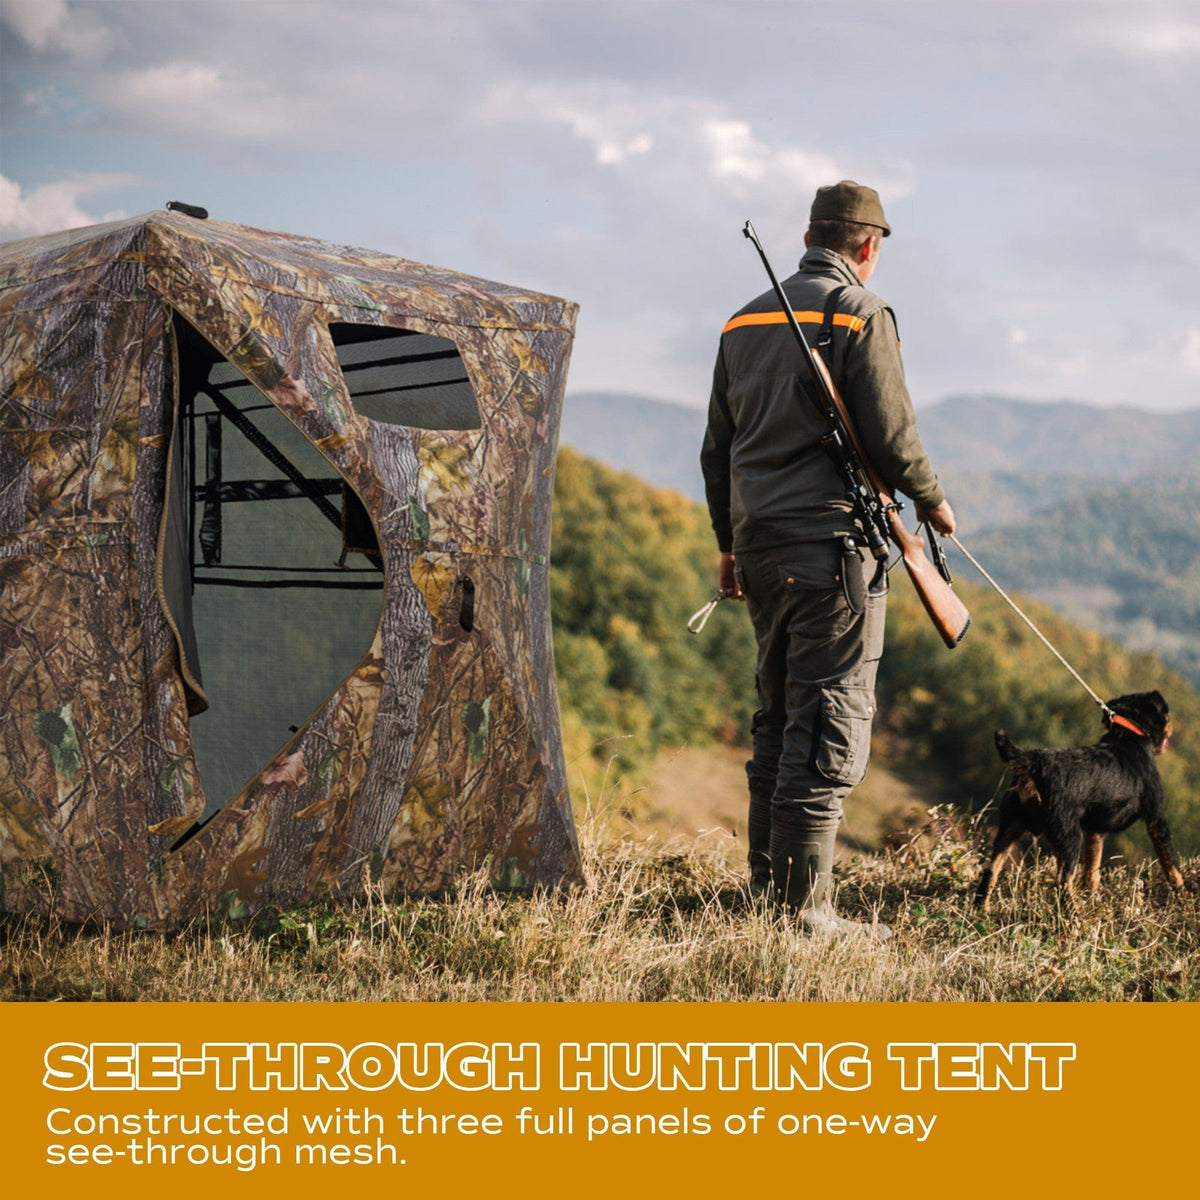 RPNB HGB-1 Hunting Blind Armadillo Safe and Vault